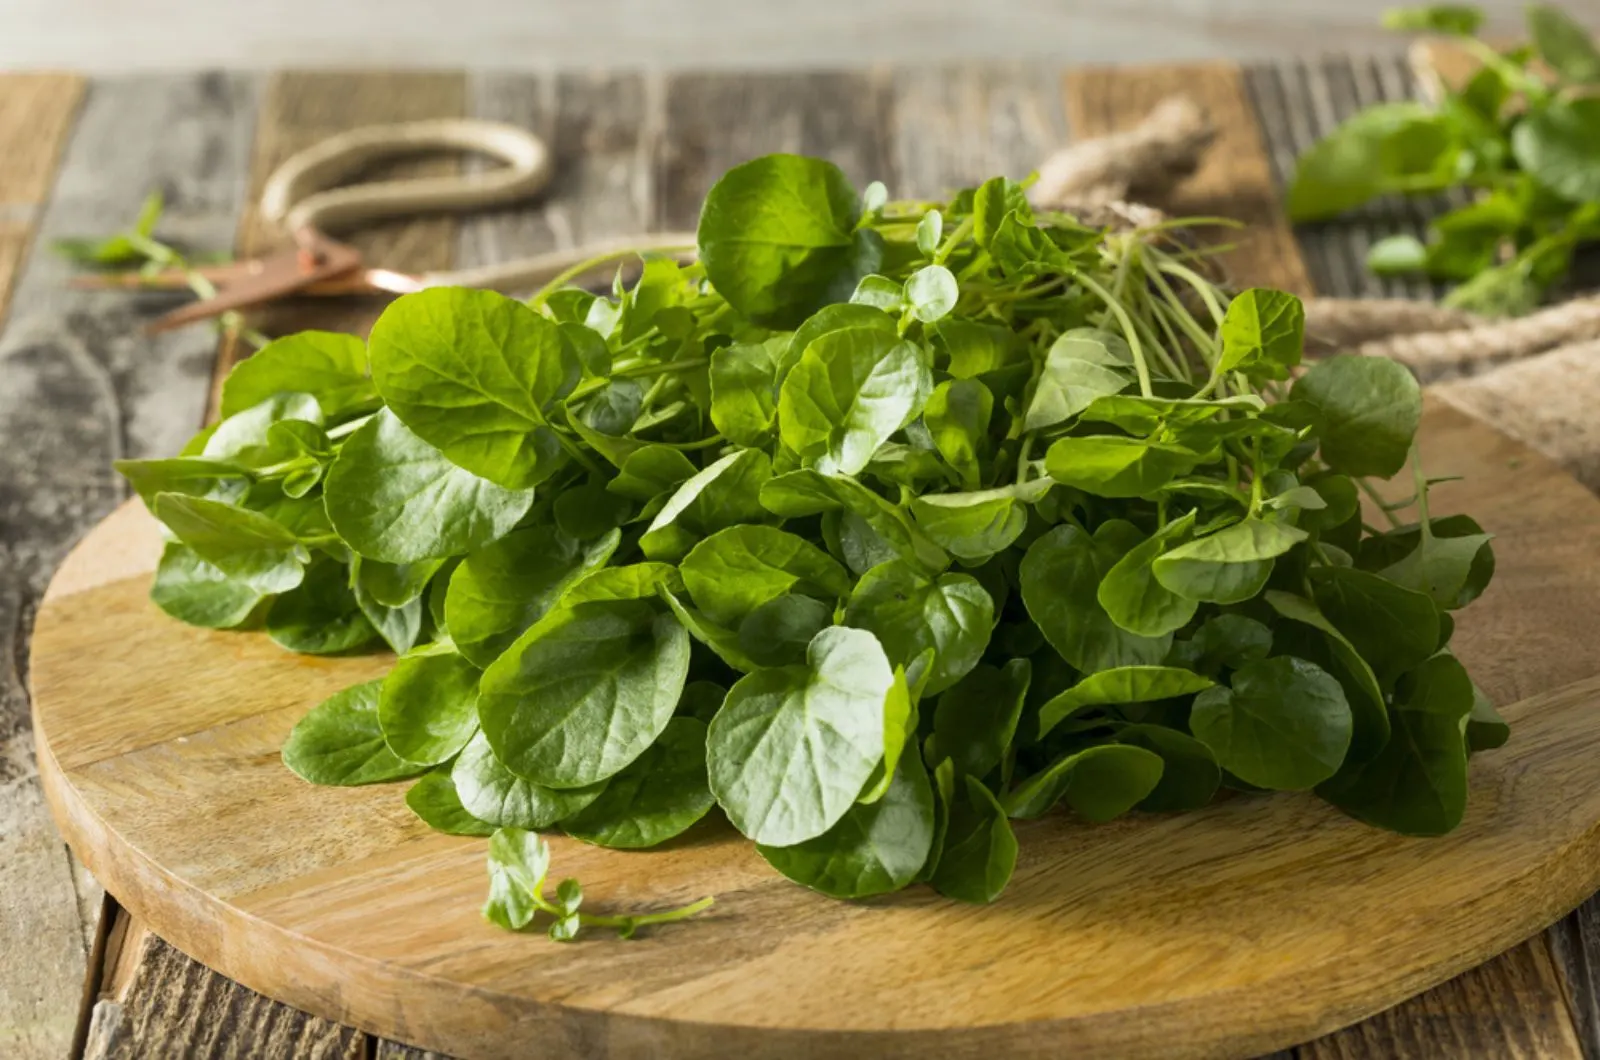 Watercress on the wooden board